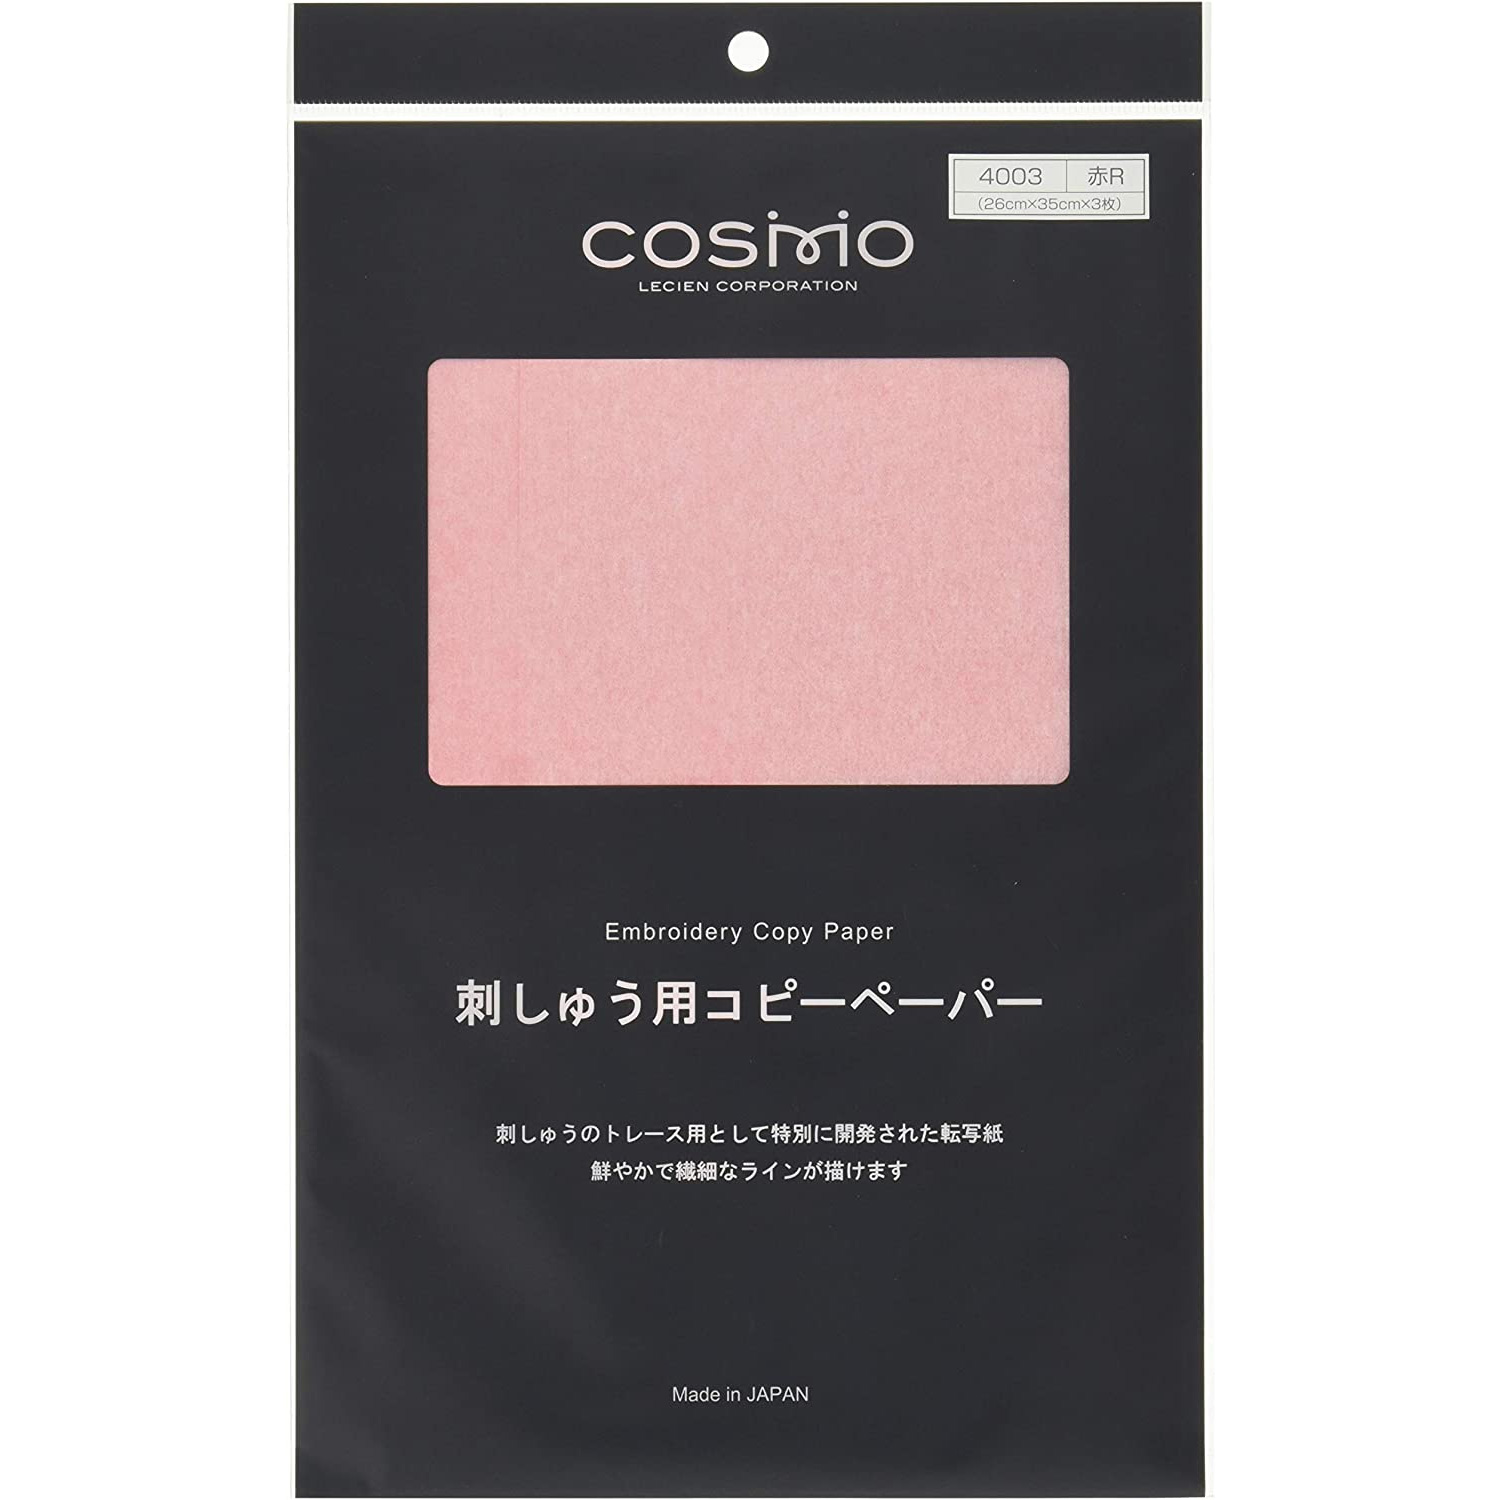 COT4003-R Lecien Cosmo Transfer Paper for Embroidery"", red (3pcs/pk)